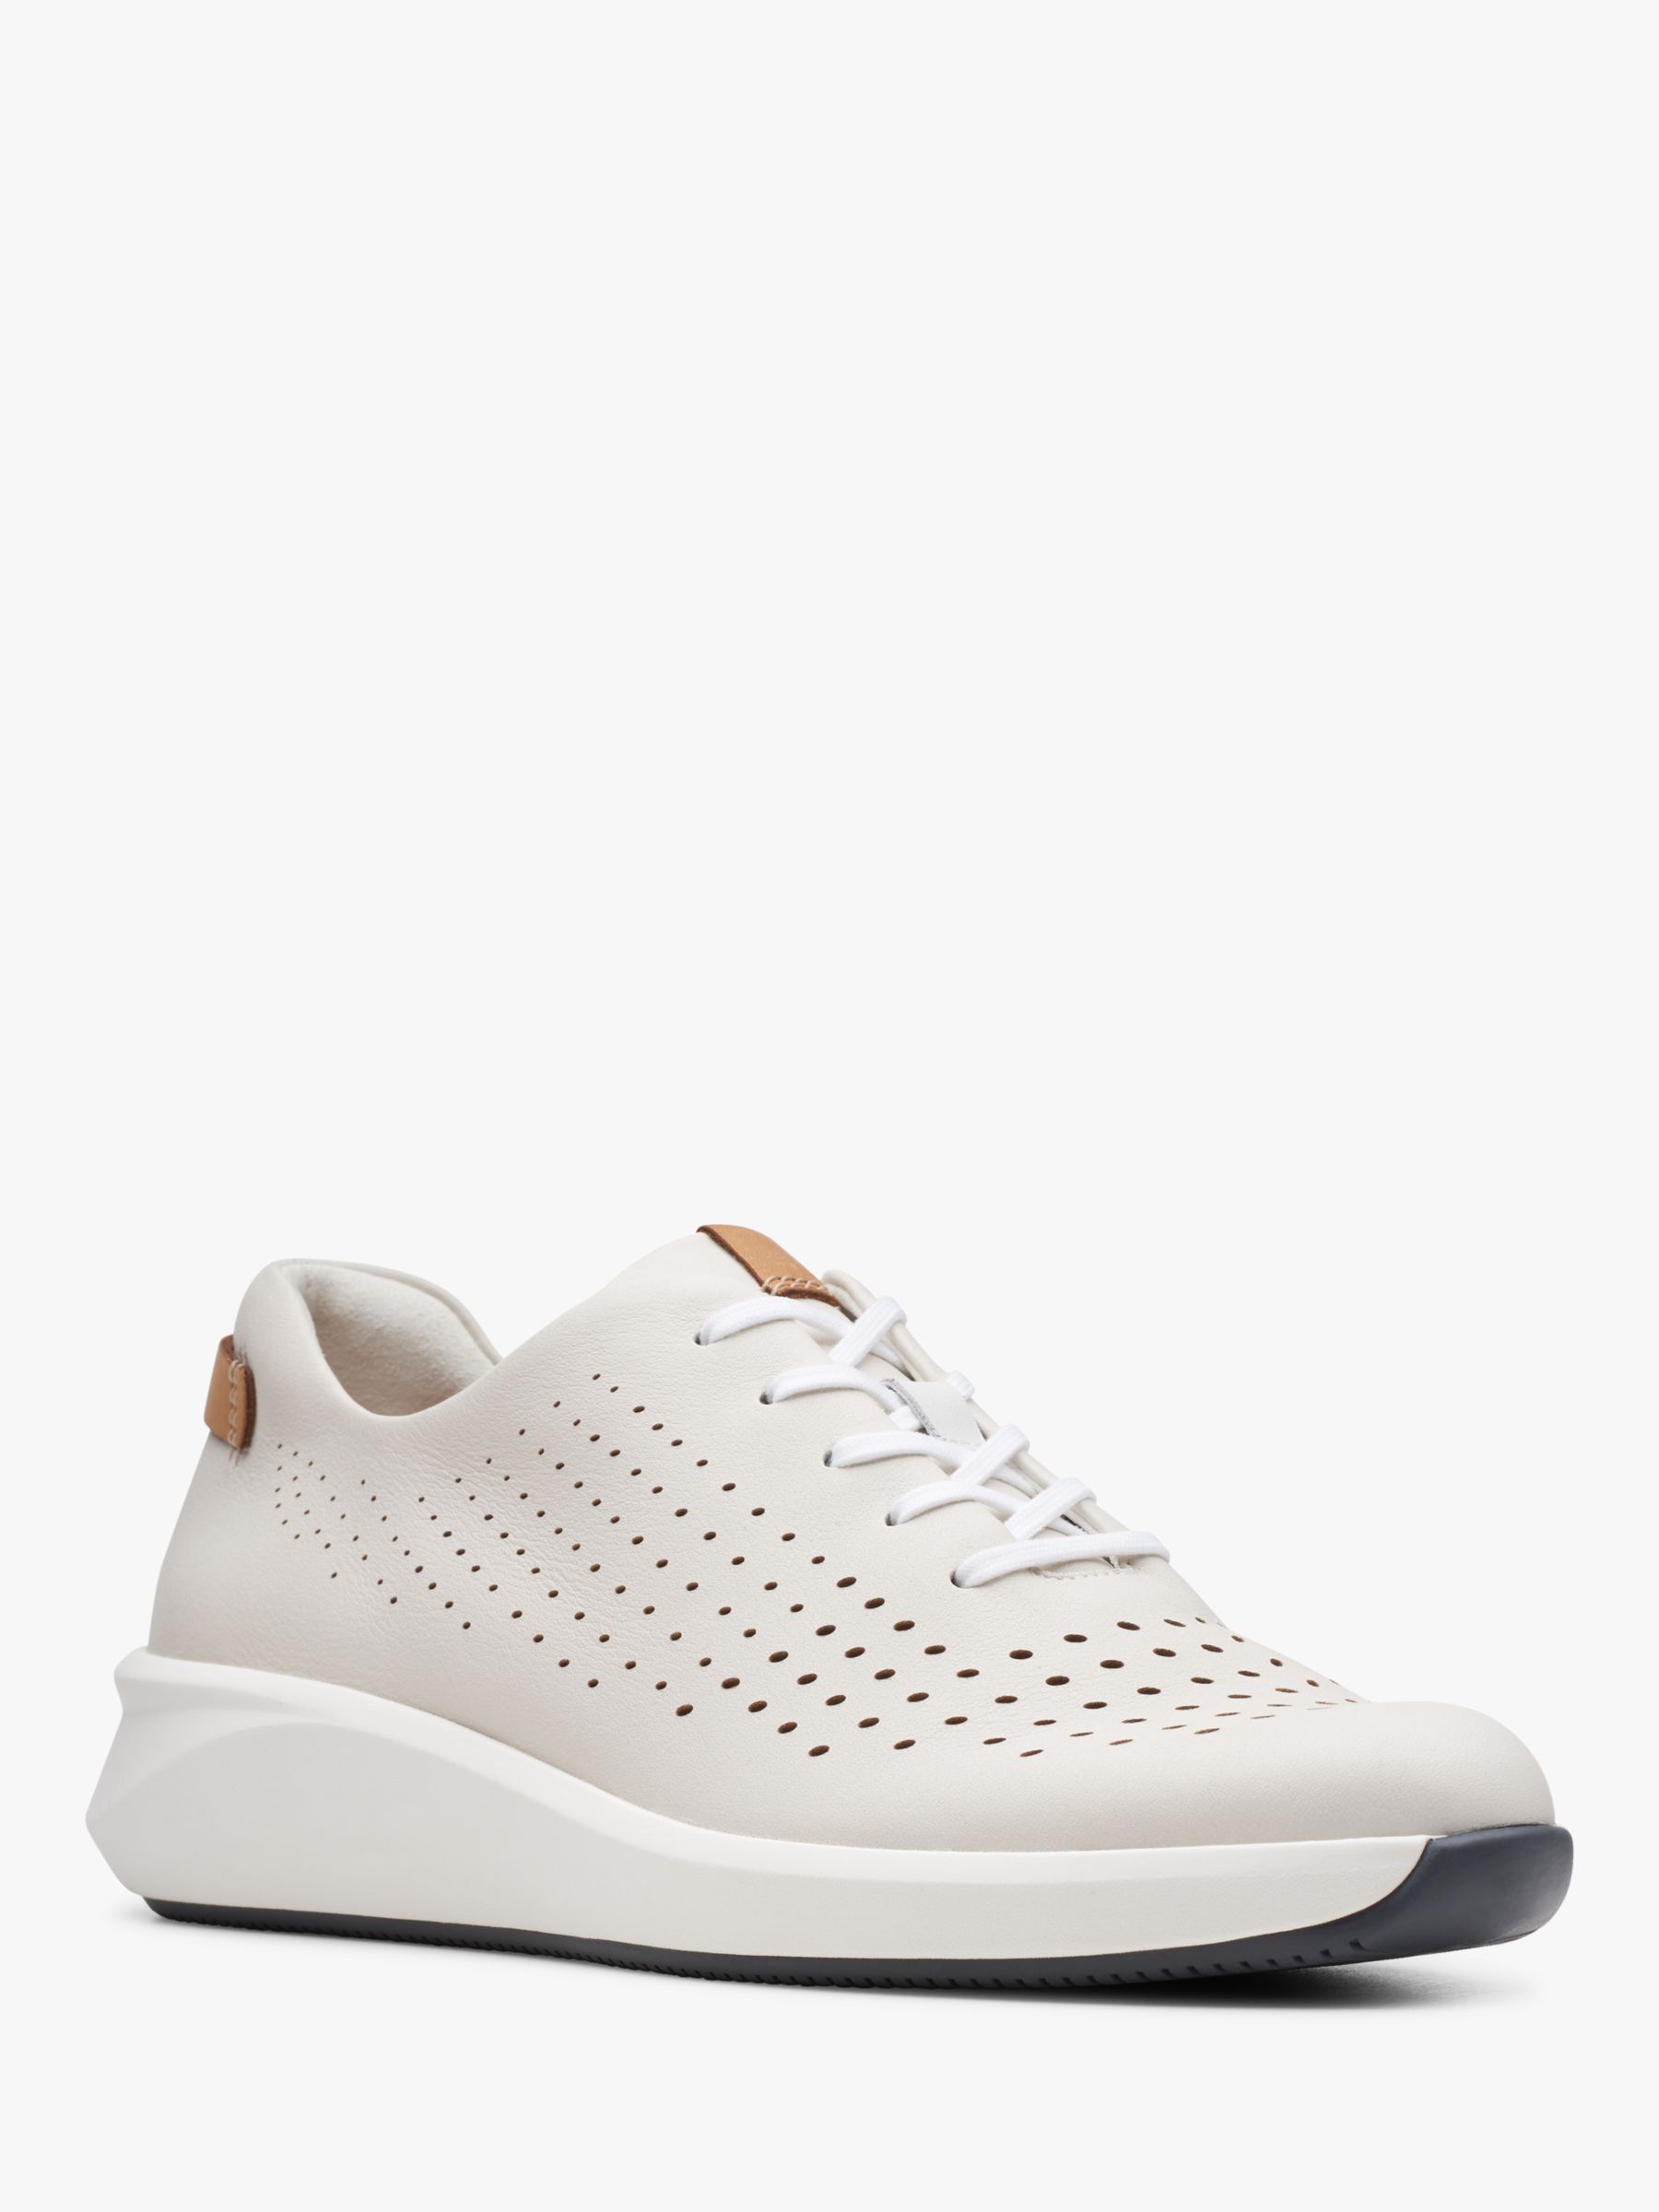 Clarks Un Rio Lace Up Leather Trainers, White